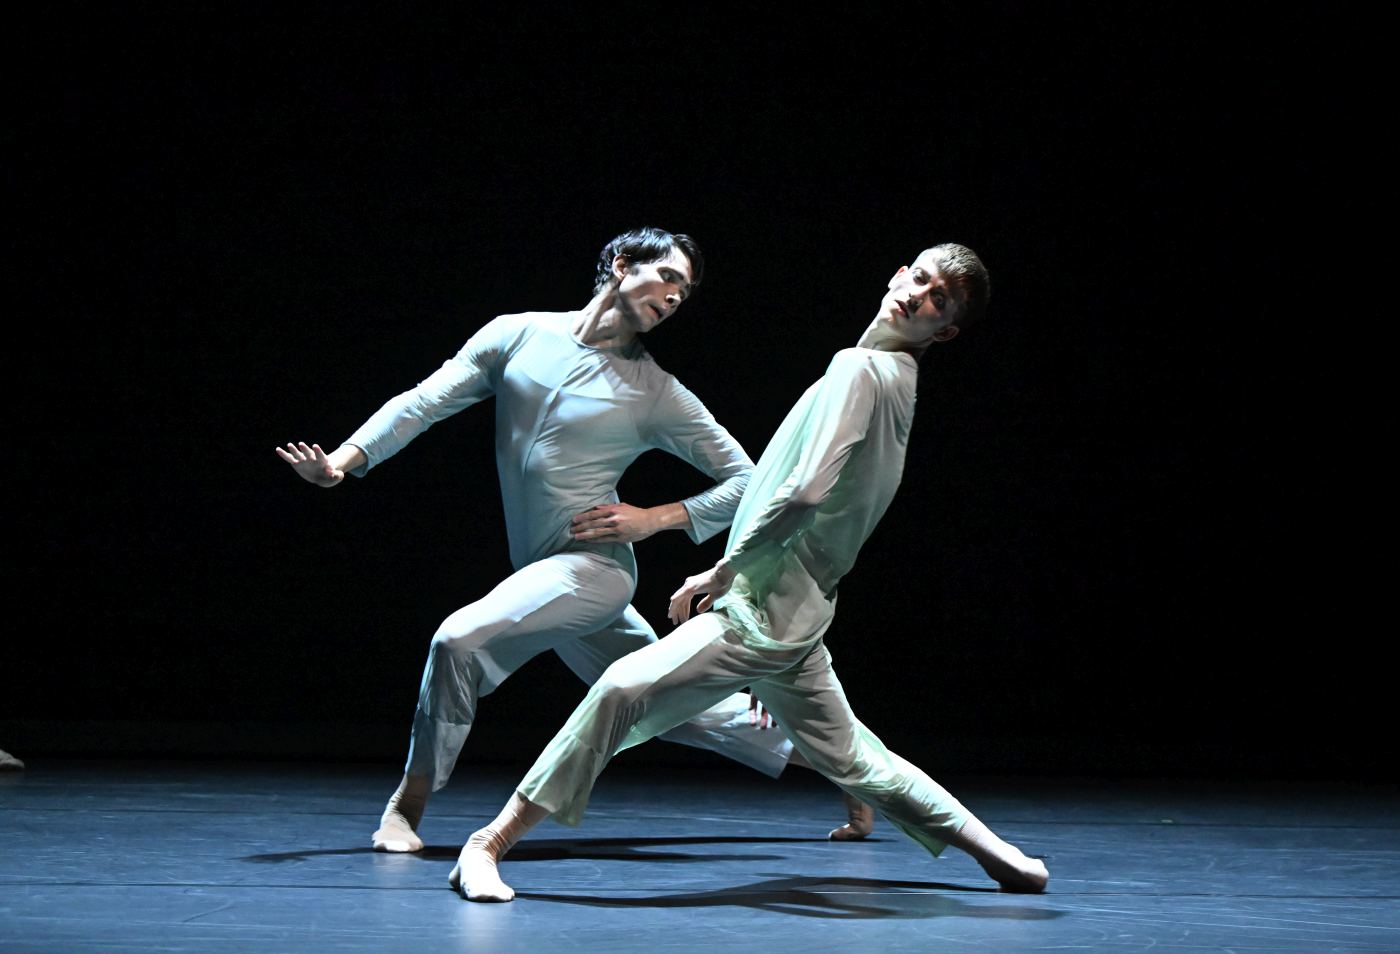 8. L.Stiens and S.Heller, “Ifima” by L.Stiens and S.Heller, Stuttgart Ballet 2022 © Stuttgart Ballet